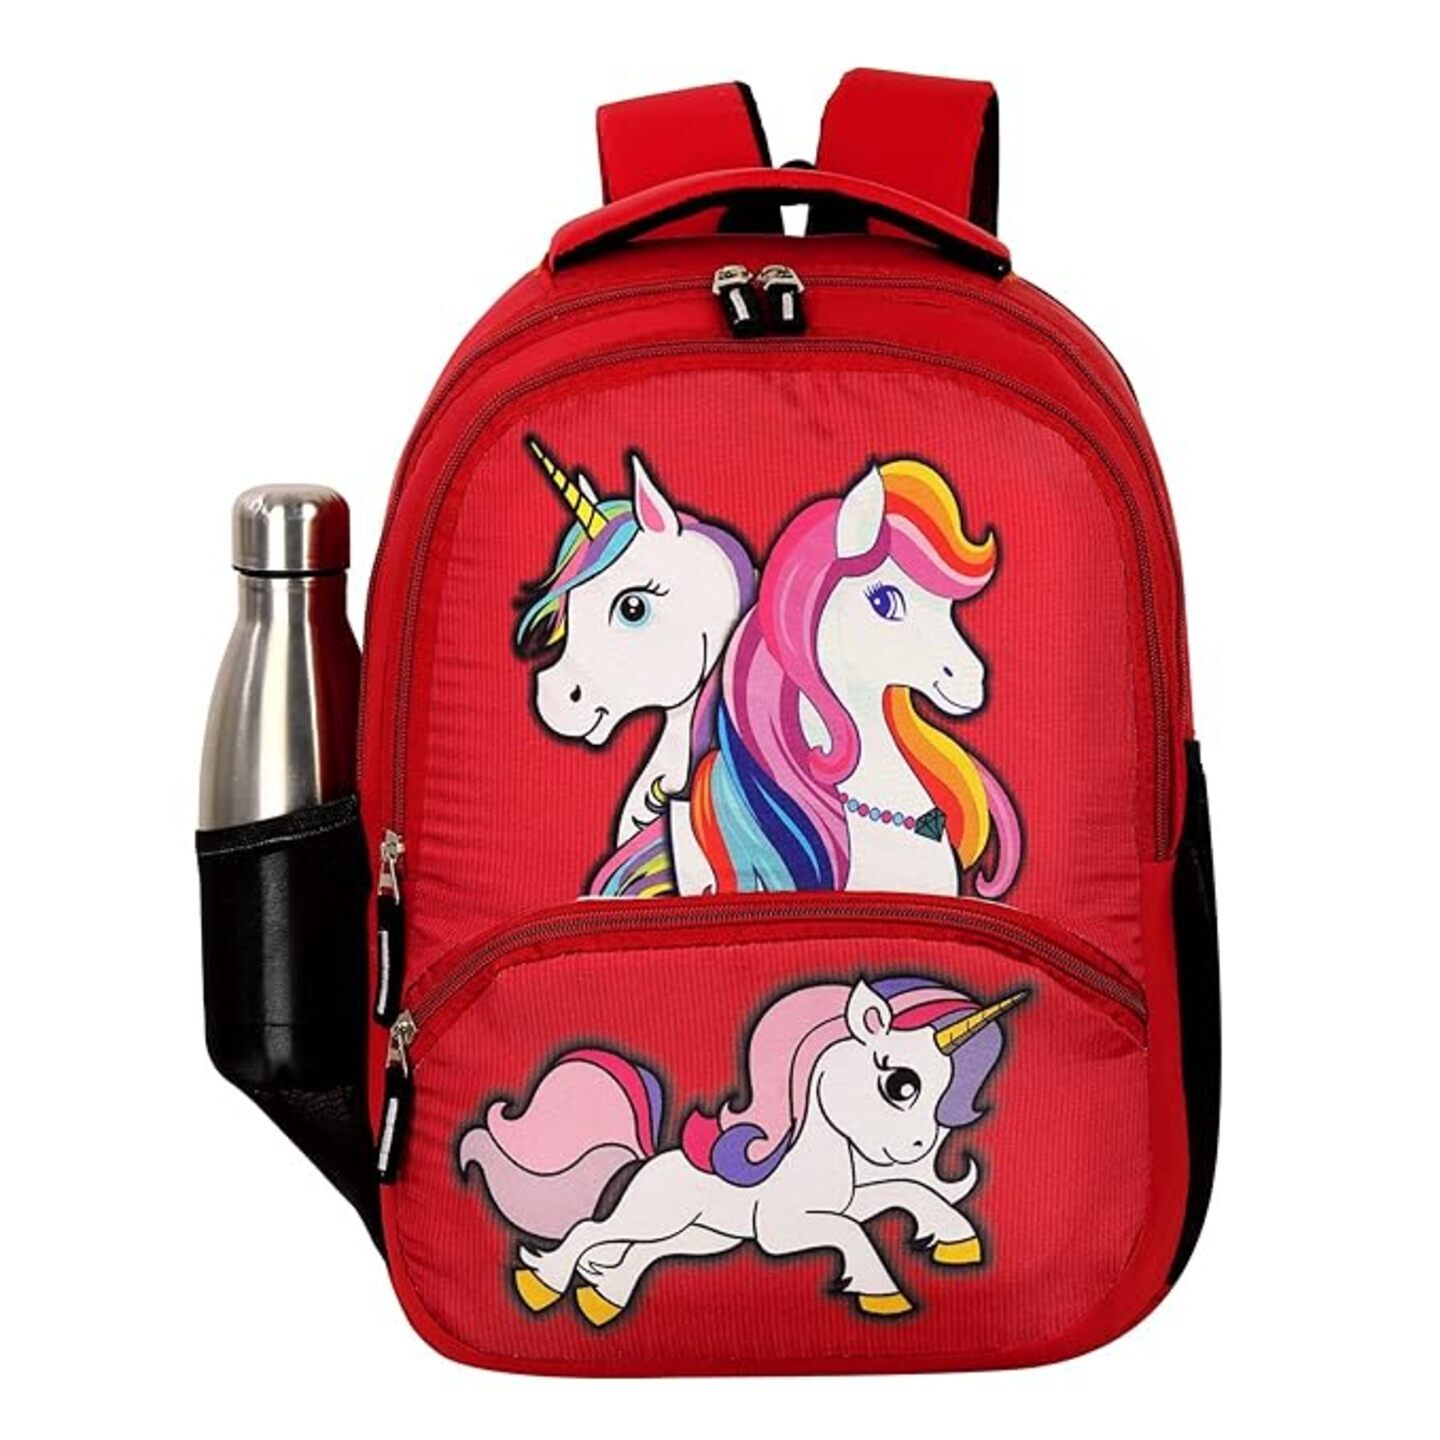 Kids School Backpack for Boys & Girls (Age 4-8 Years)